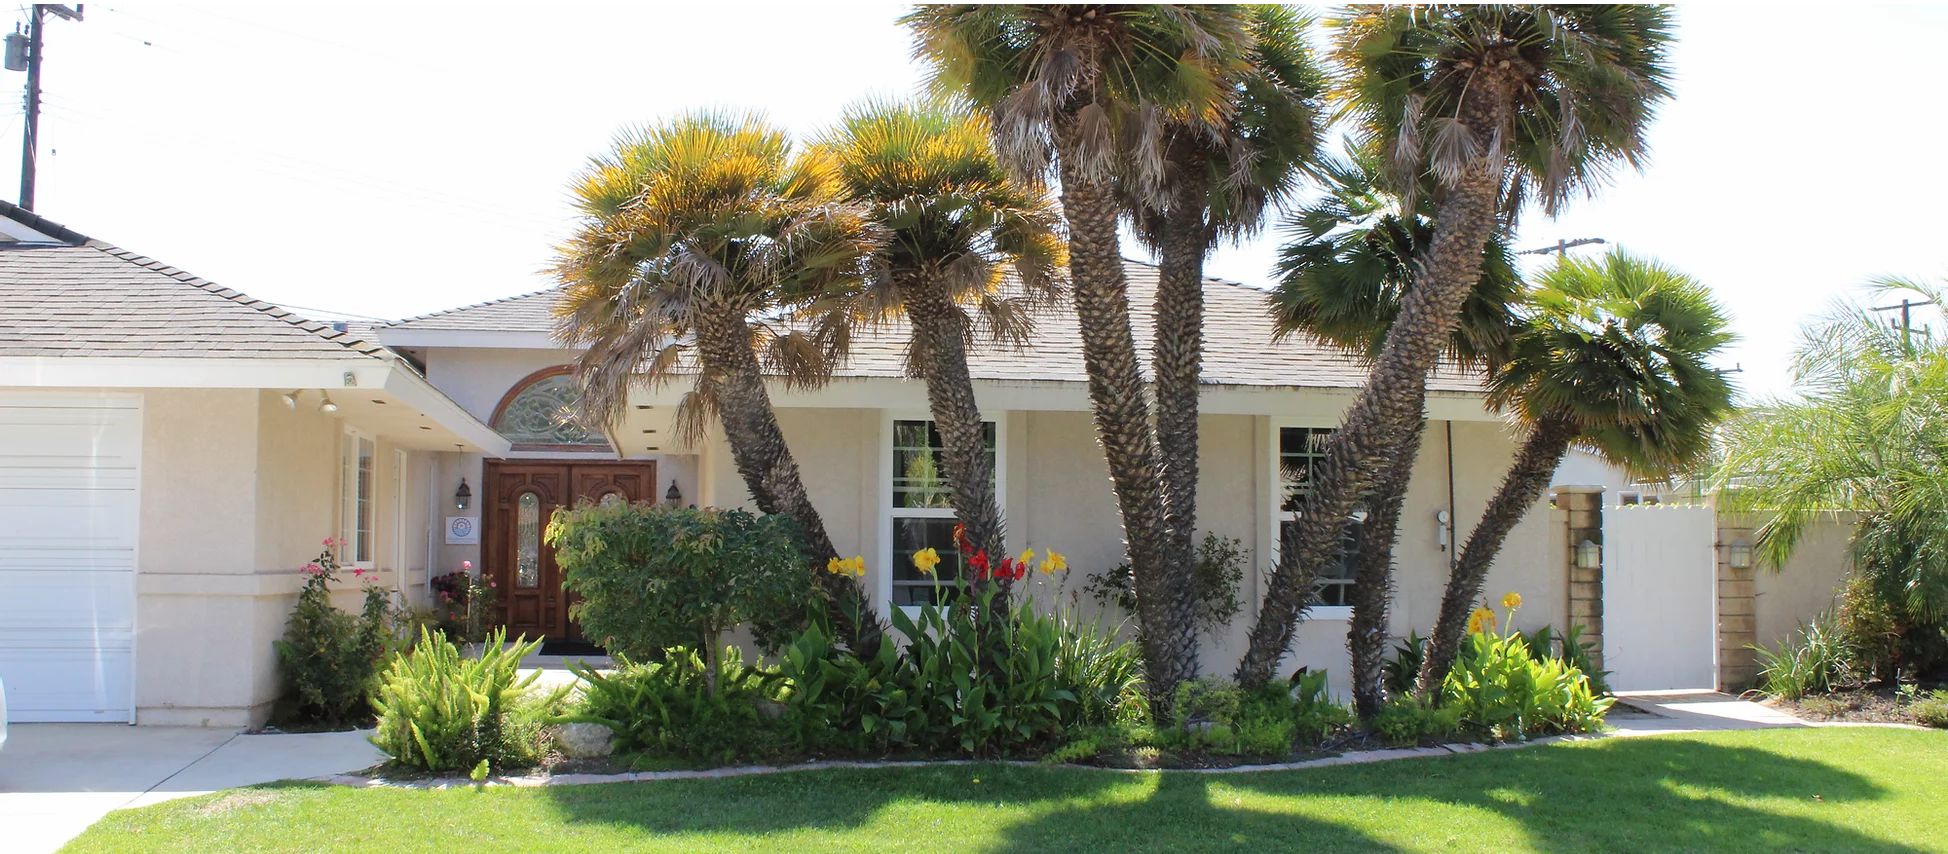 Senior living community, Ocean Breeze Estates at Beechwood, featuring villas, lawns, and palm trees.